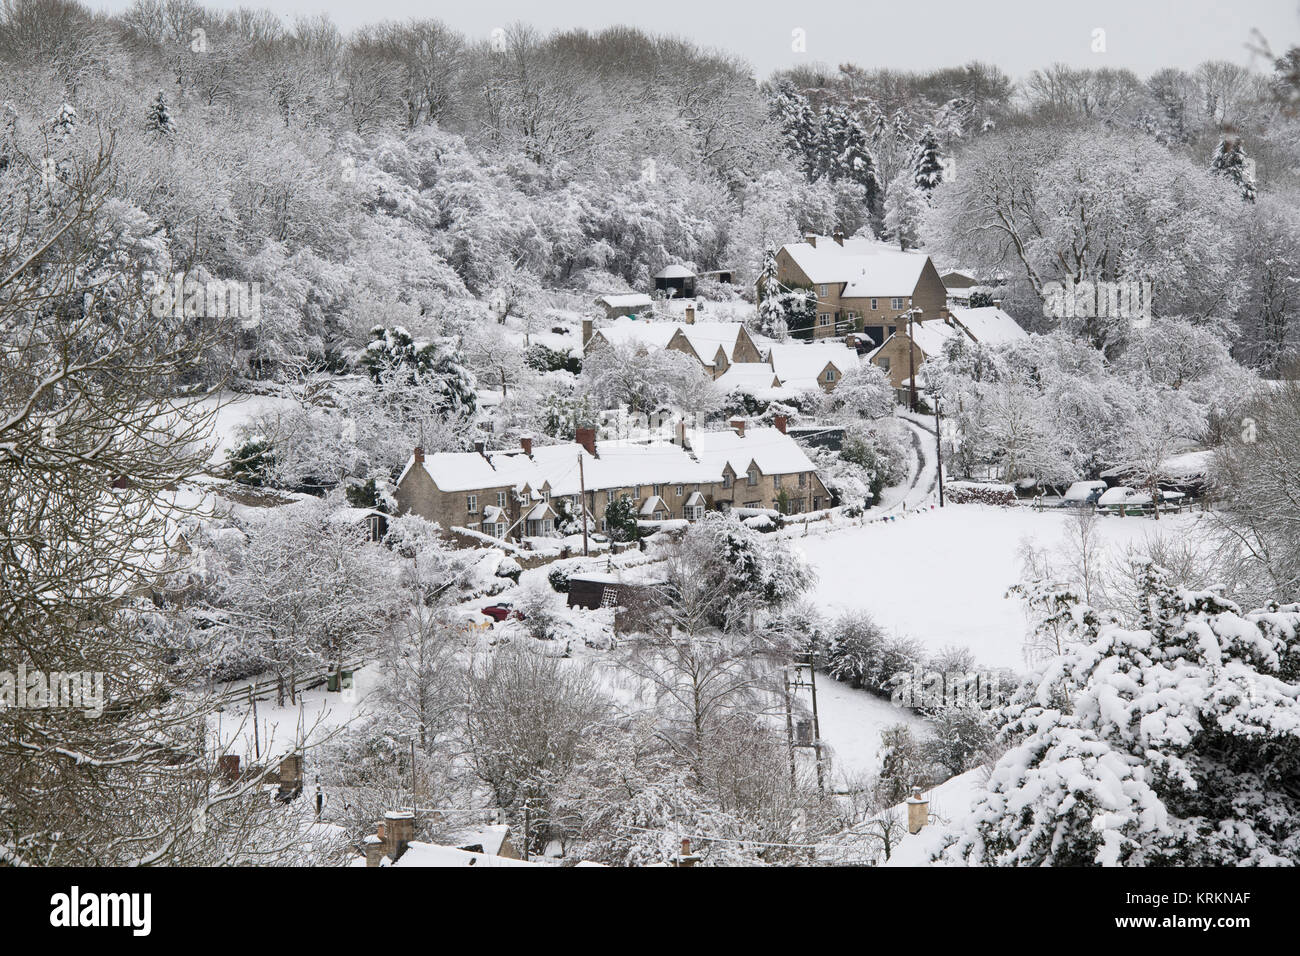 Chedworth Dorf im Dezember Schnee. Chedworth, Cotswolds, Gloucestershire, England Stockfoto